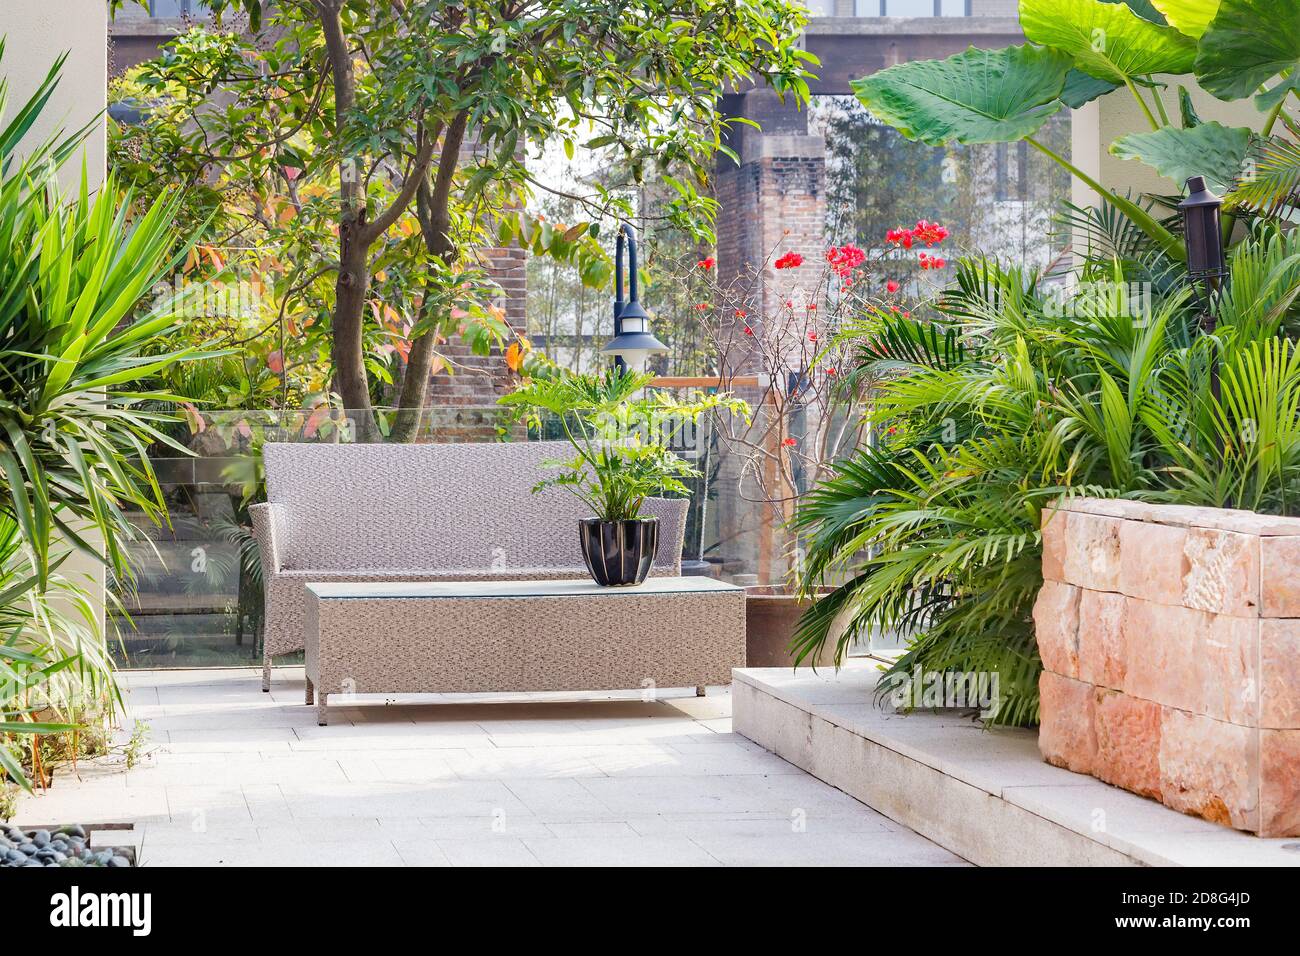 Backyard with cane chair and table in a Garden Stock Photo